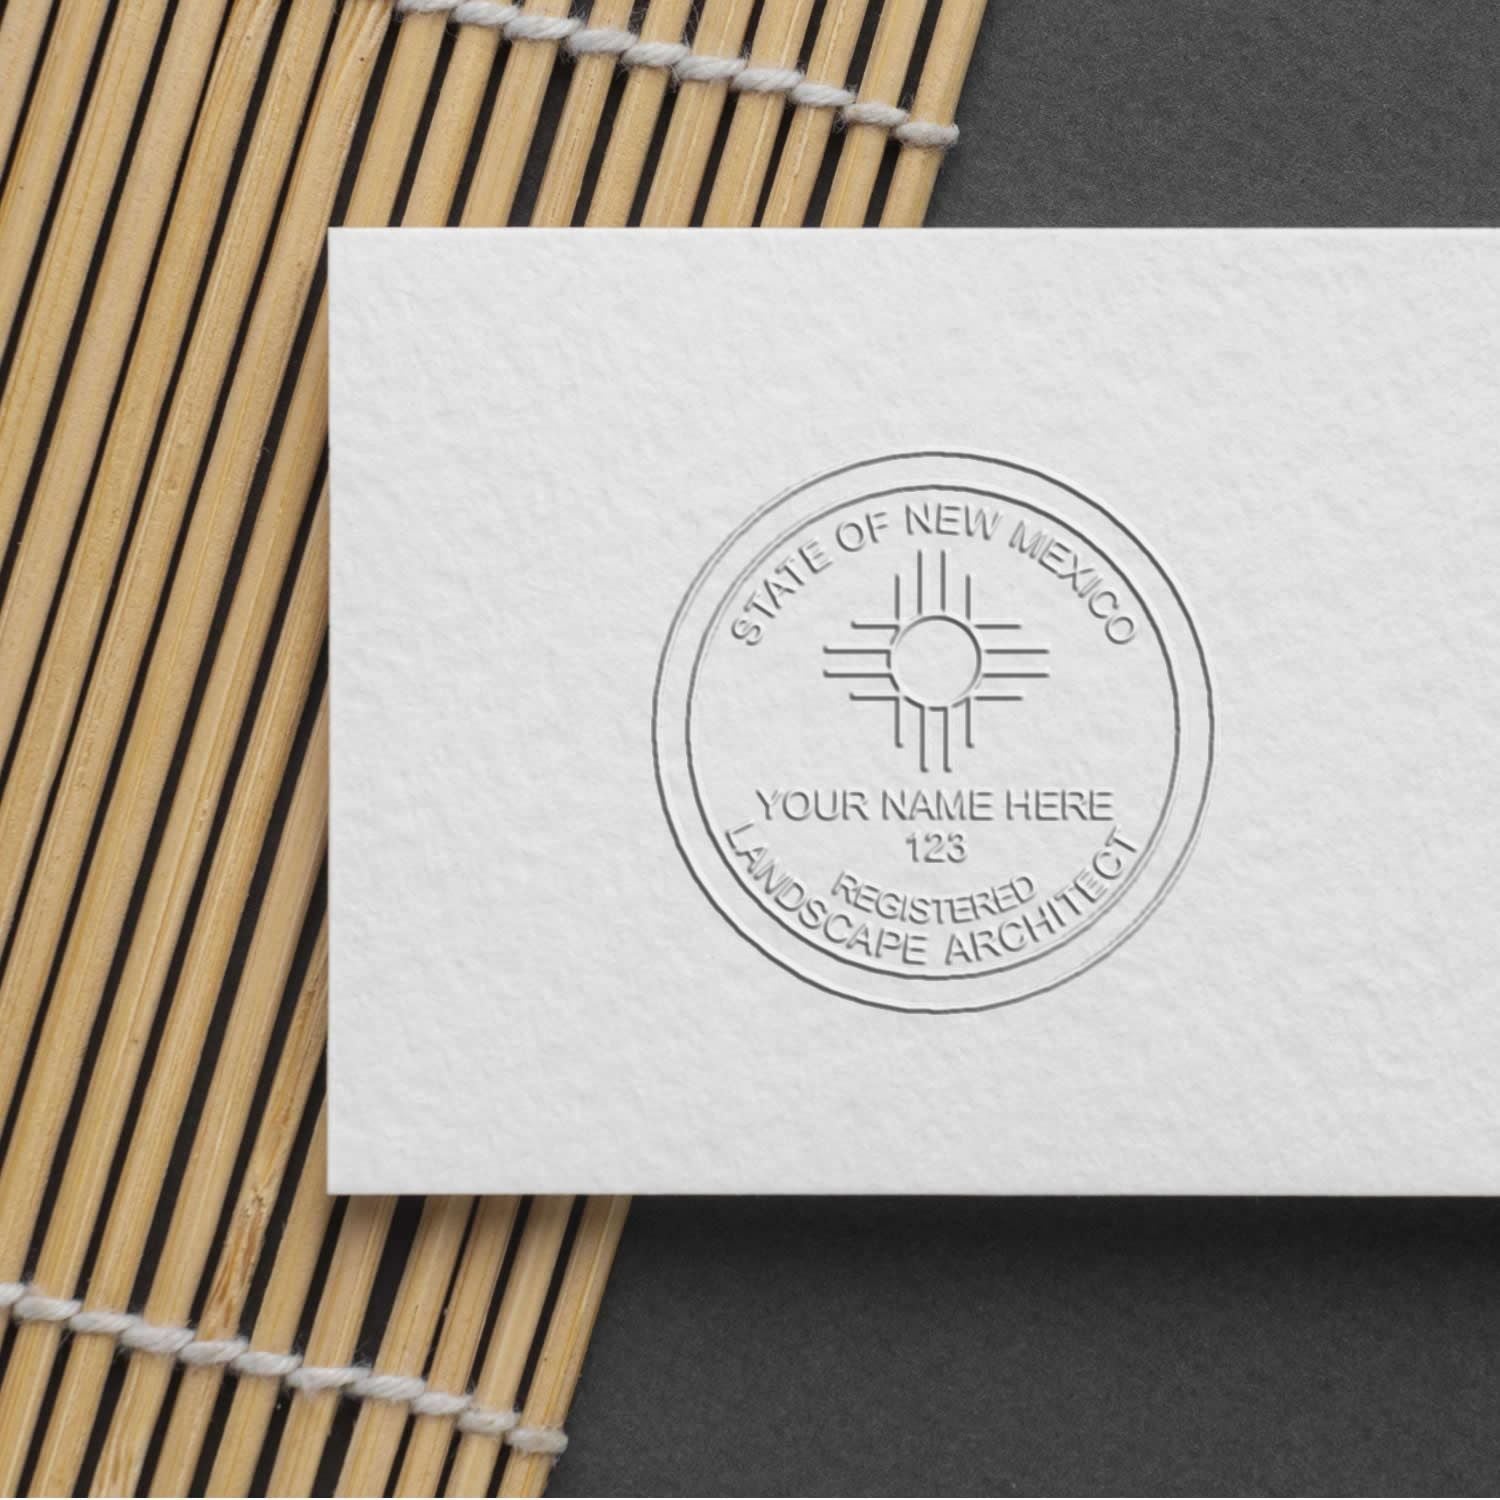 An in use photo of the Gift New Mexico Landscape Architect Seal showing a sample imprint on a cardstock